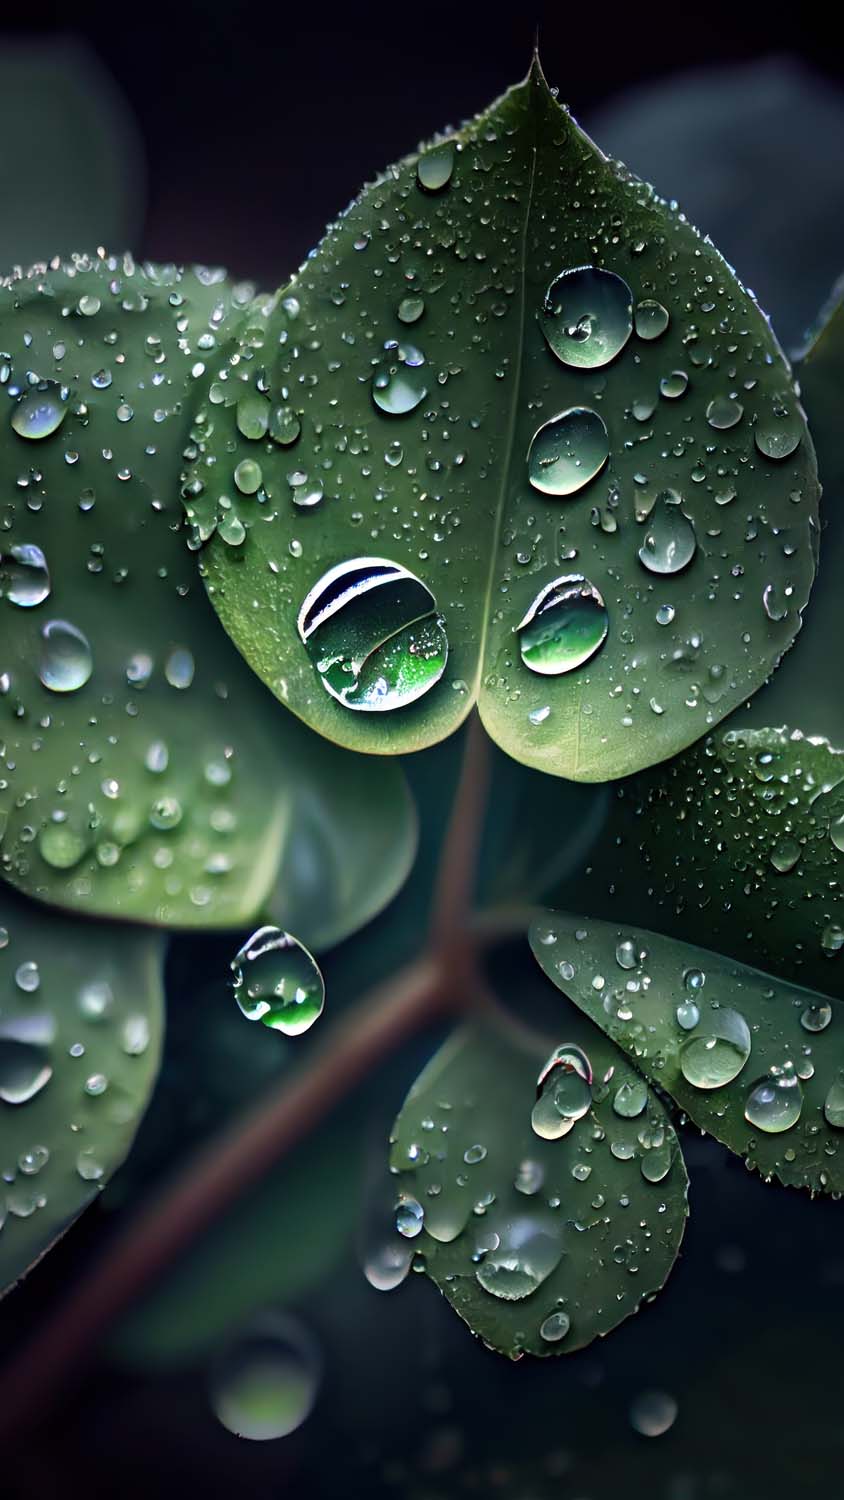 Water Drops on Leaves iPhone Wallpaper HD